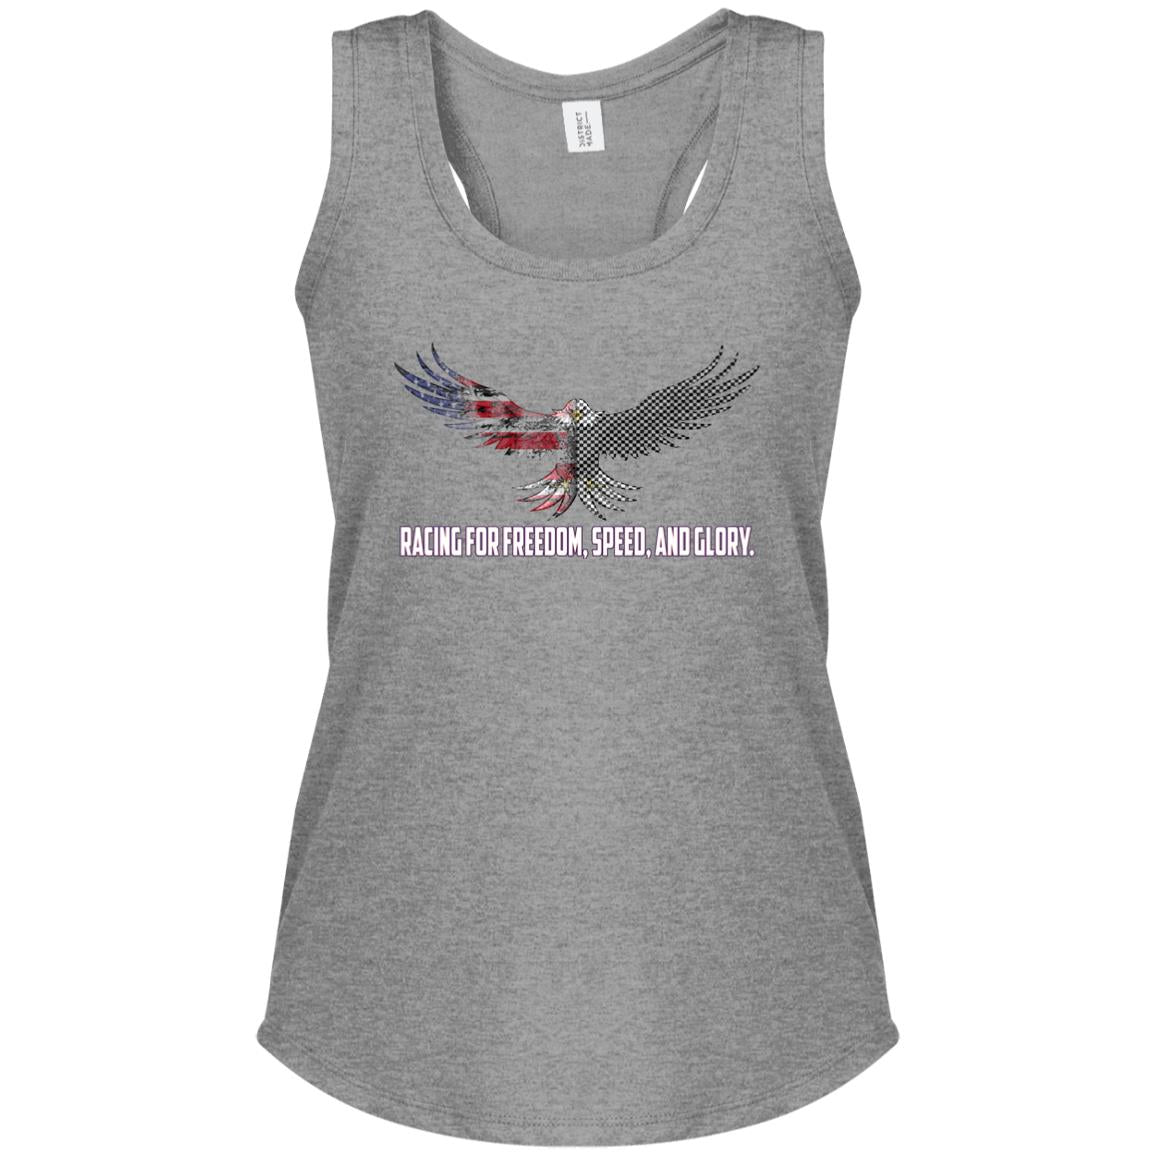 Racing For Freedom, Speed, And Glory Women's Perfect Tri Racerback Tank